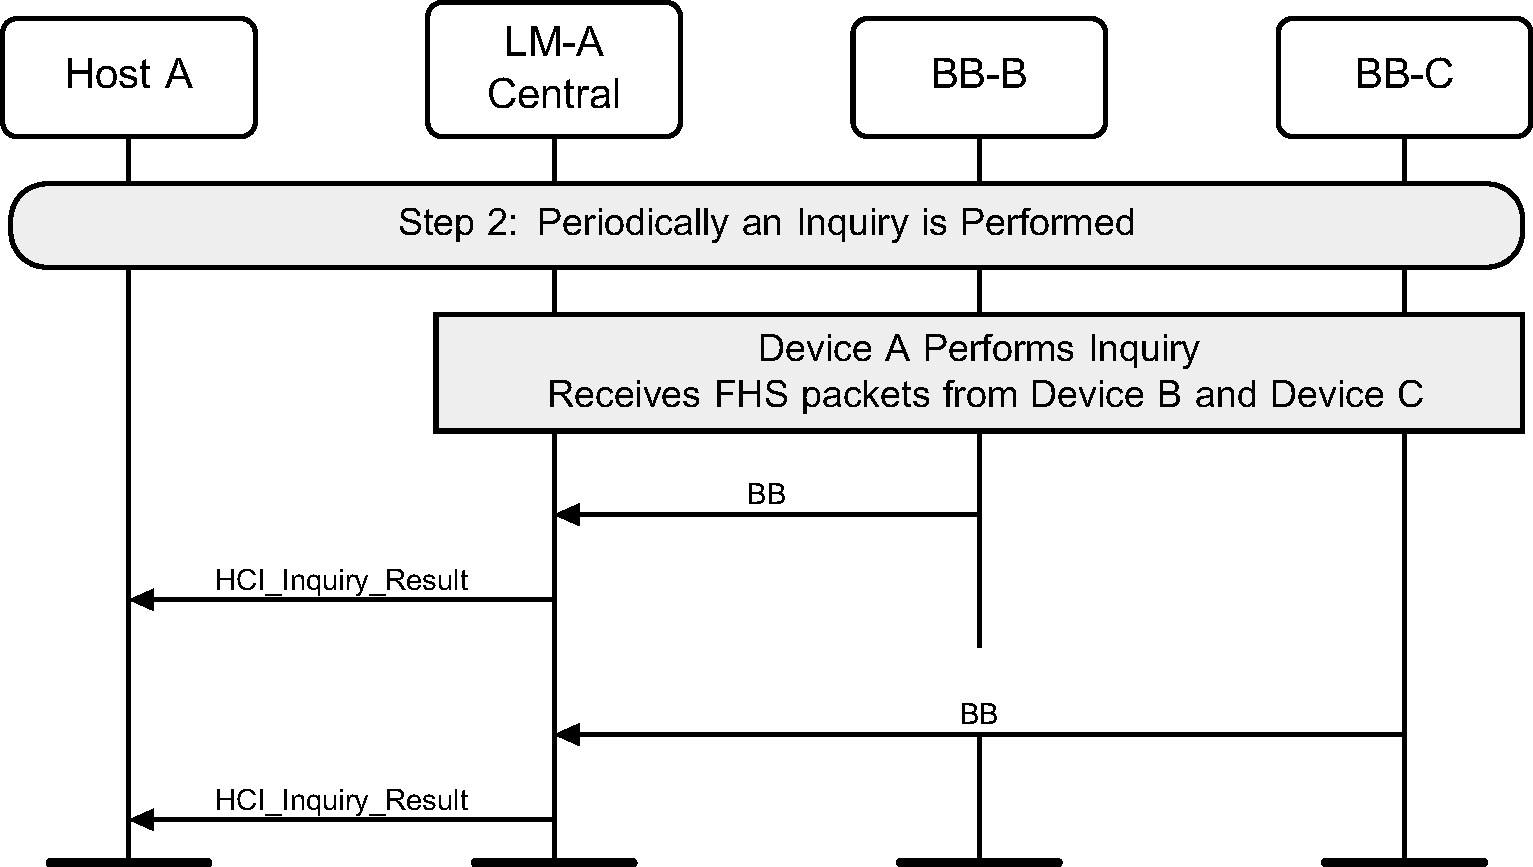 LM-A periodically performs an inquiry and reports result